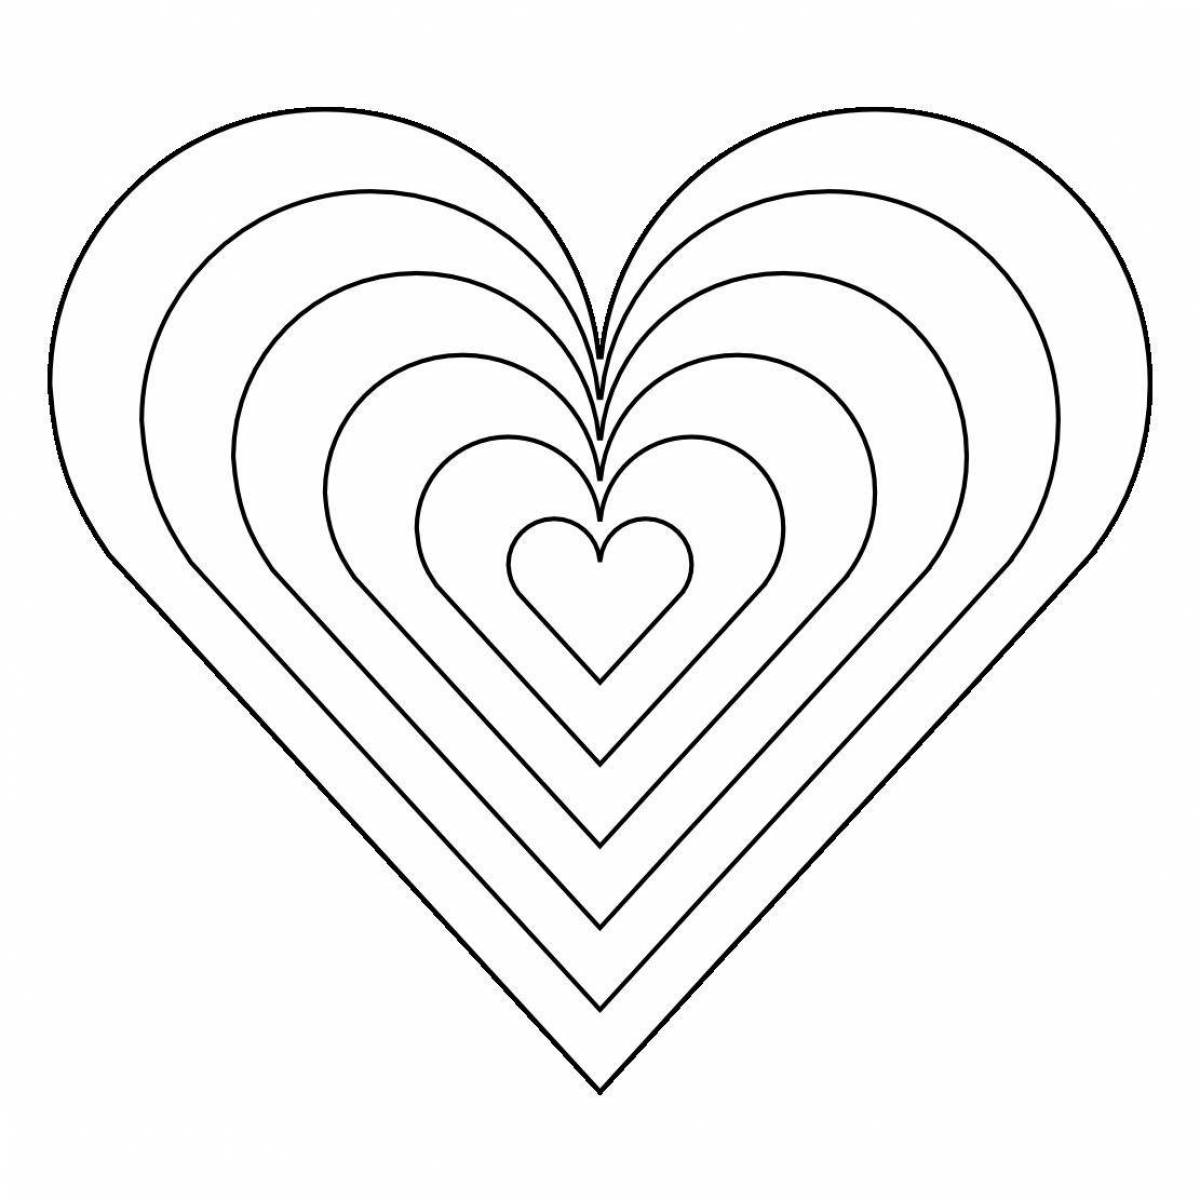 Fabulous coloring page with lots of hearts